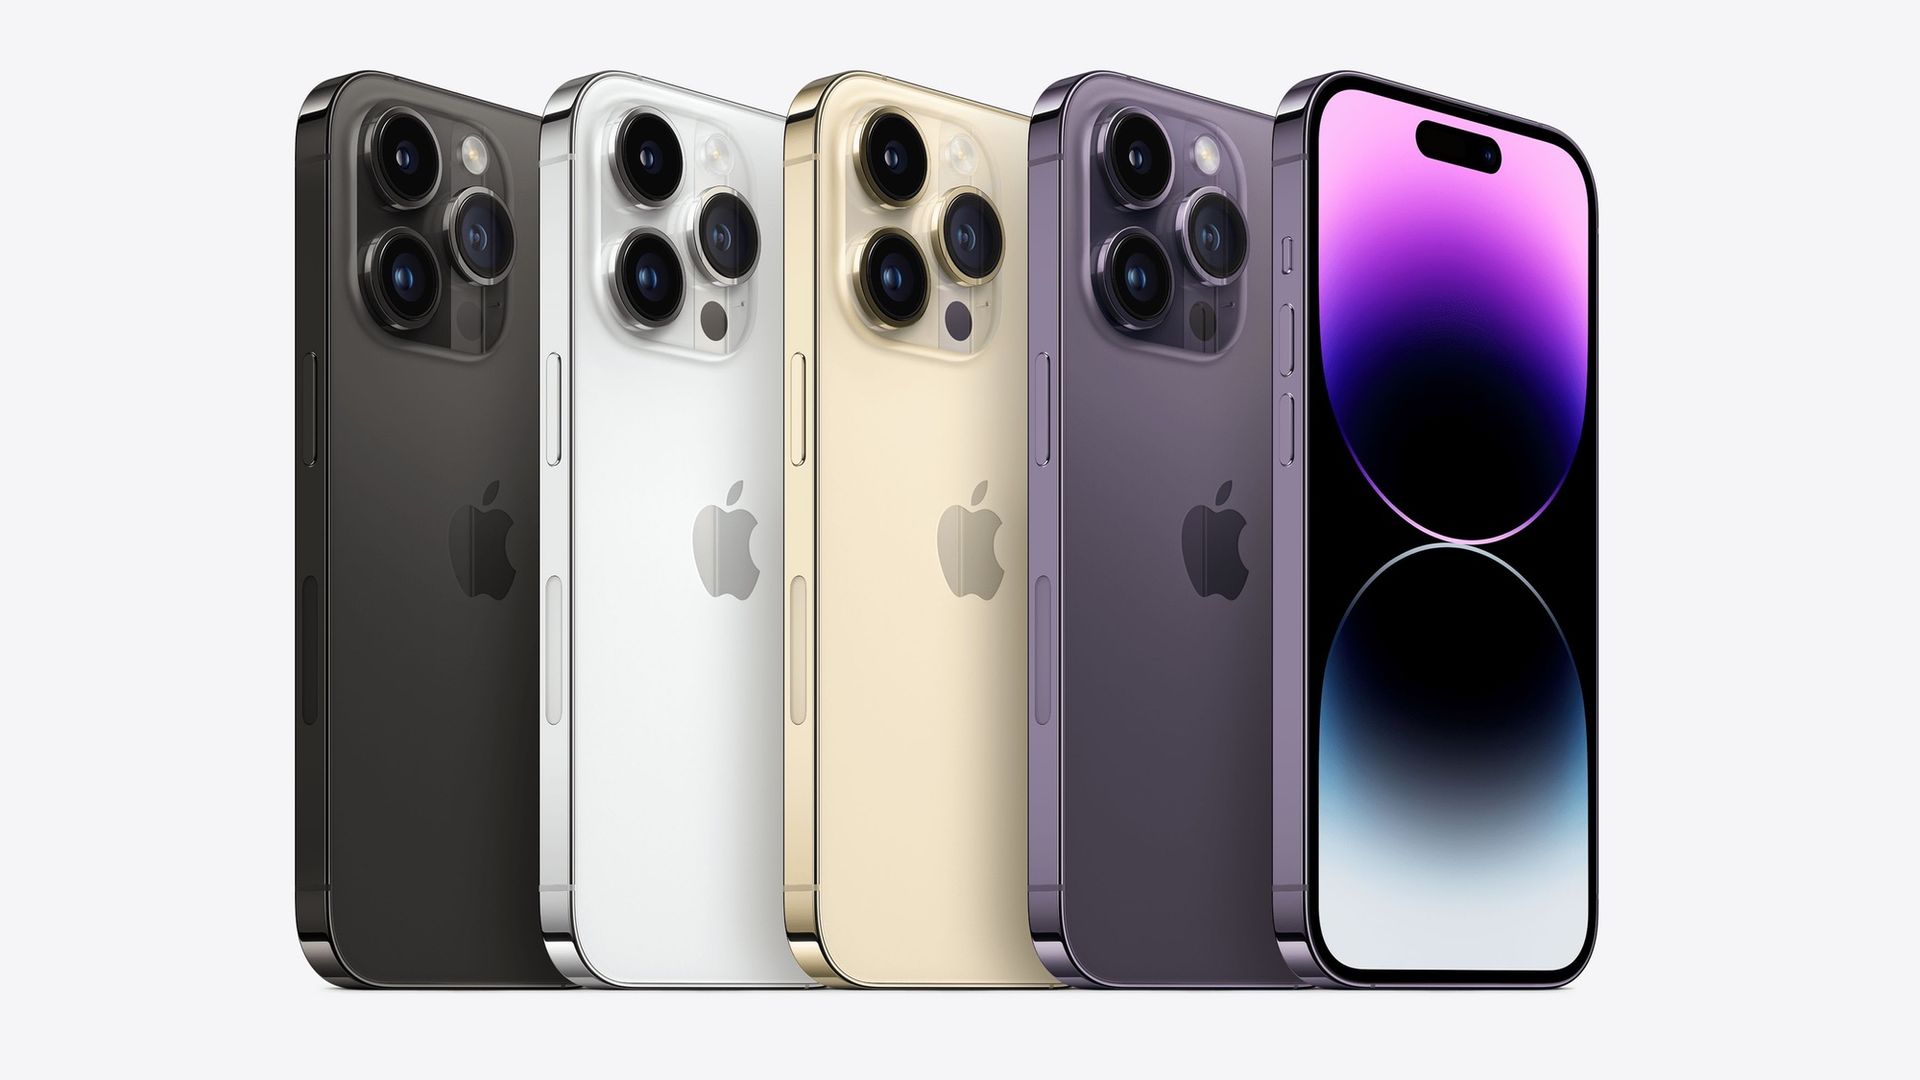 iPhone 14 Pro and Pro Max colors: Which one should you get? | Tom's Guide